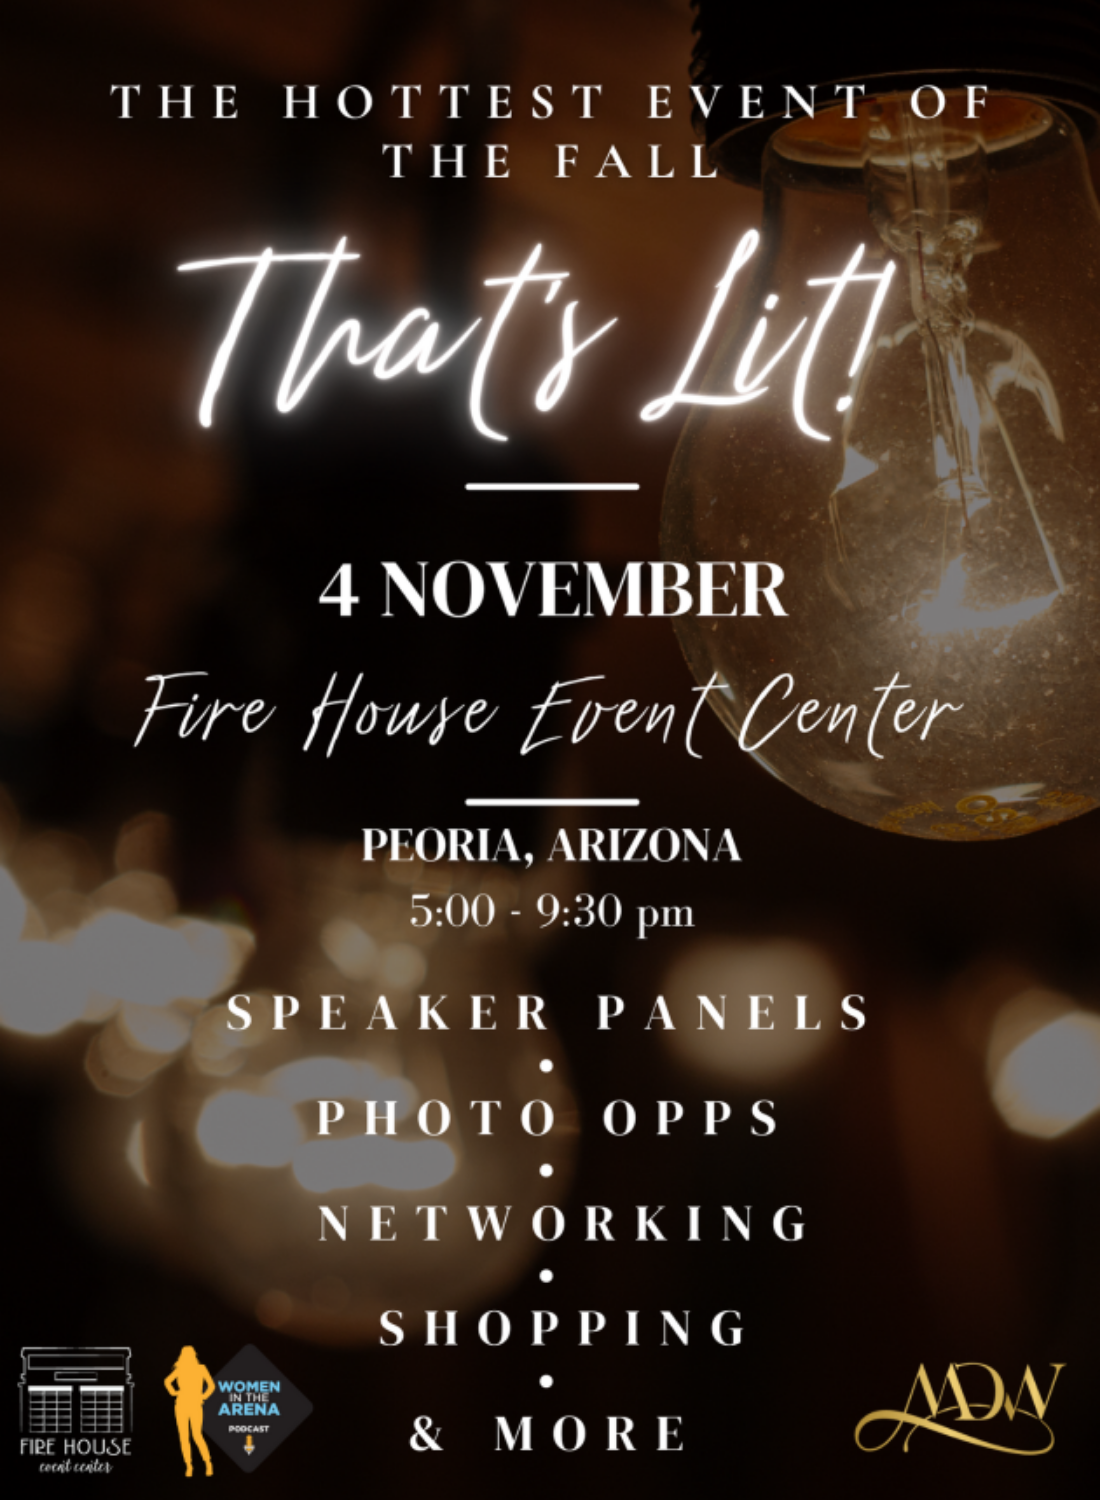 Modern Day Wife and Fire House Event Center Present: That's Lit!